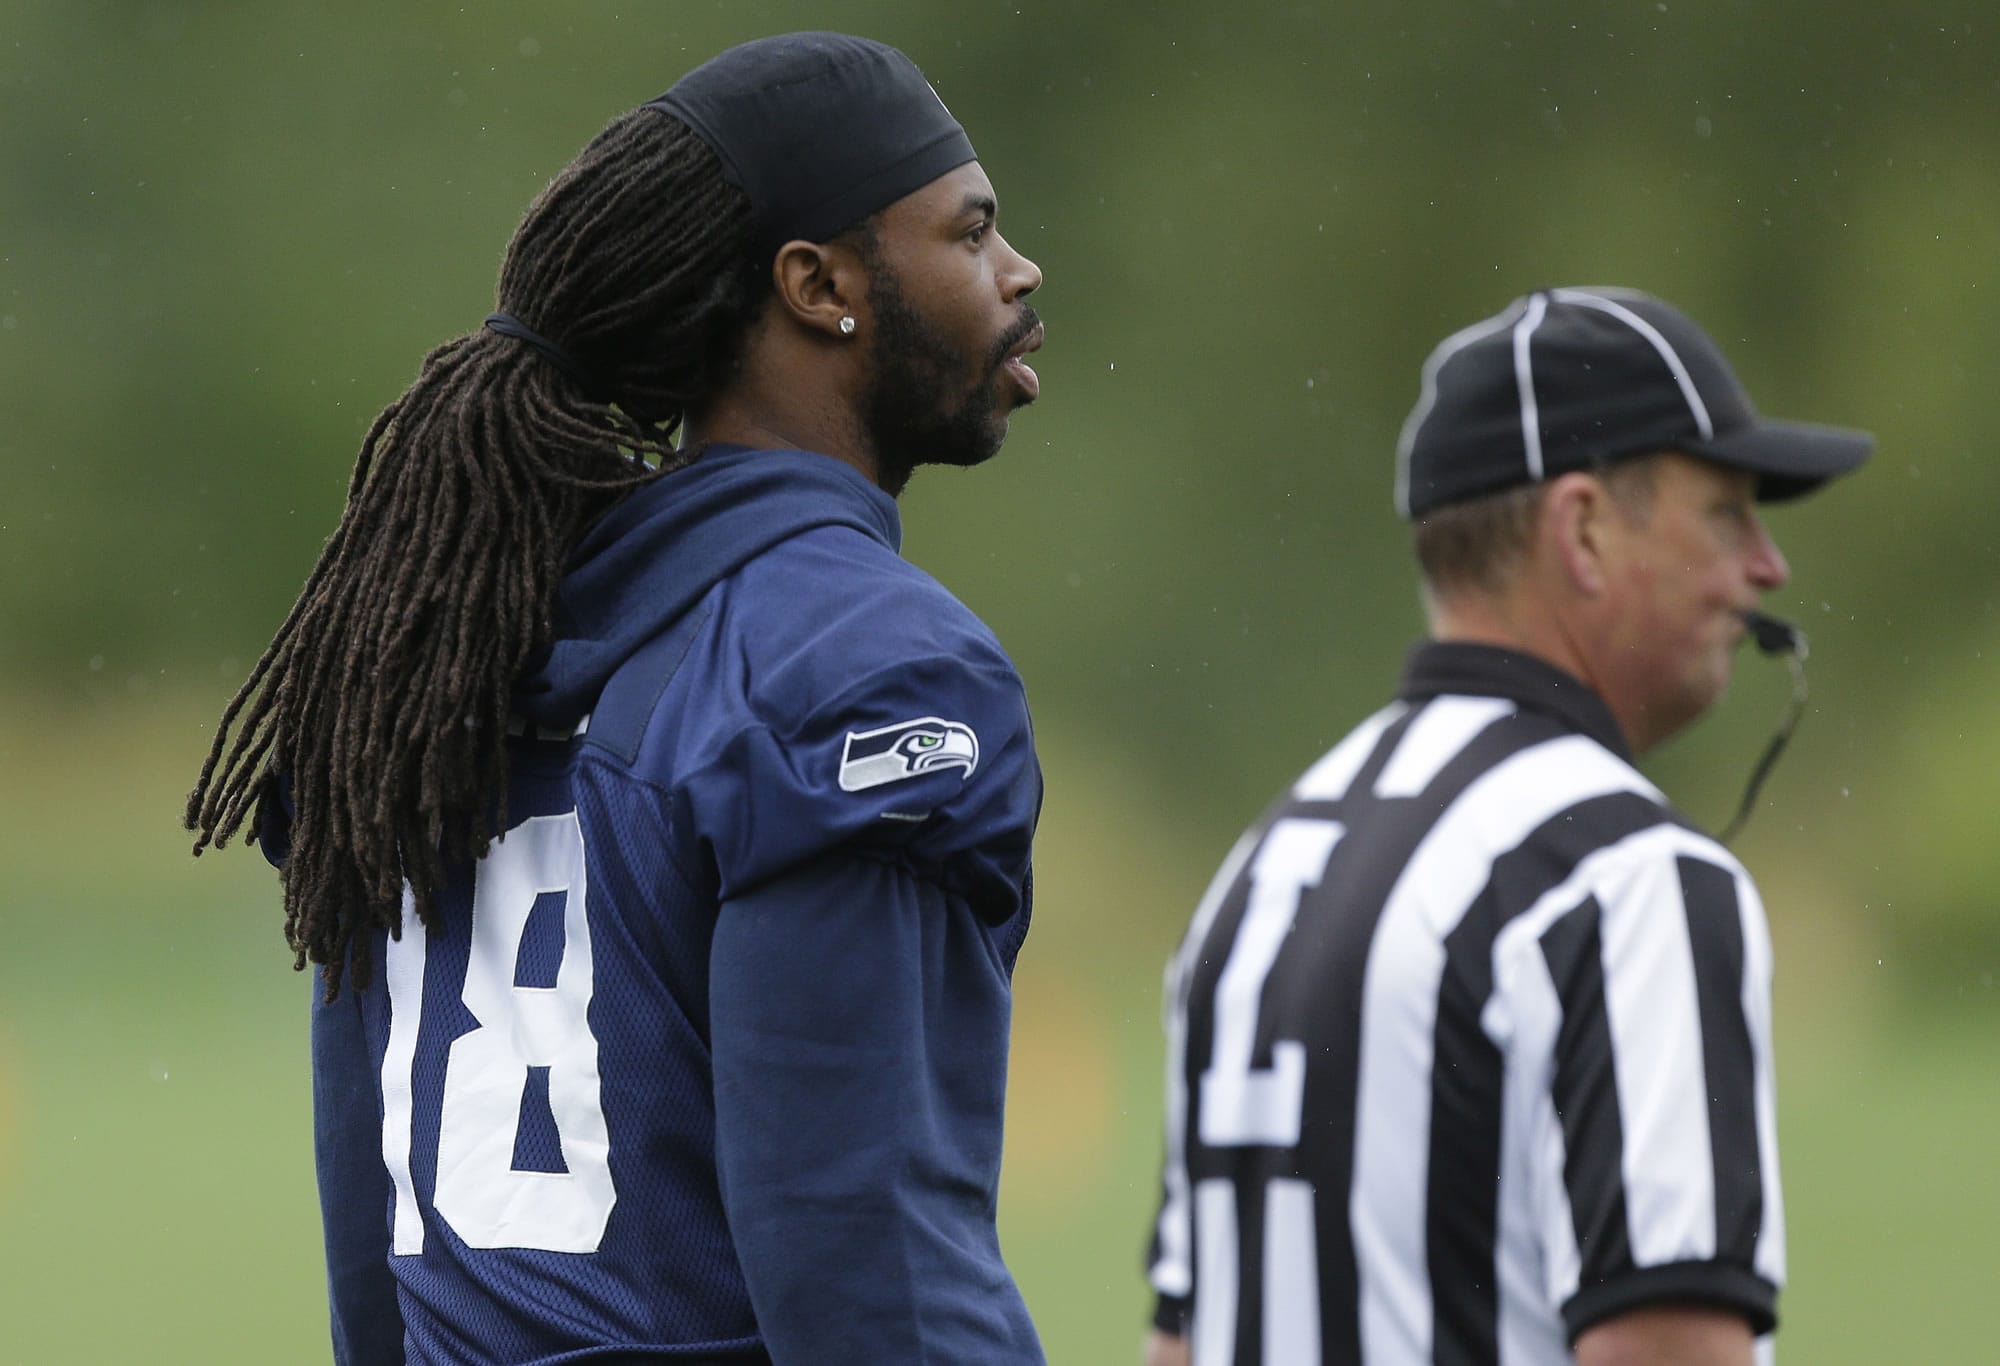 Wide receiver Sidney Rice returned to Seahawks camp Friday after receiving treatment on his sore knee in Switzerland earlier this week.